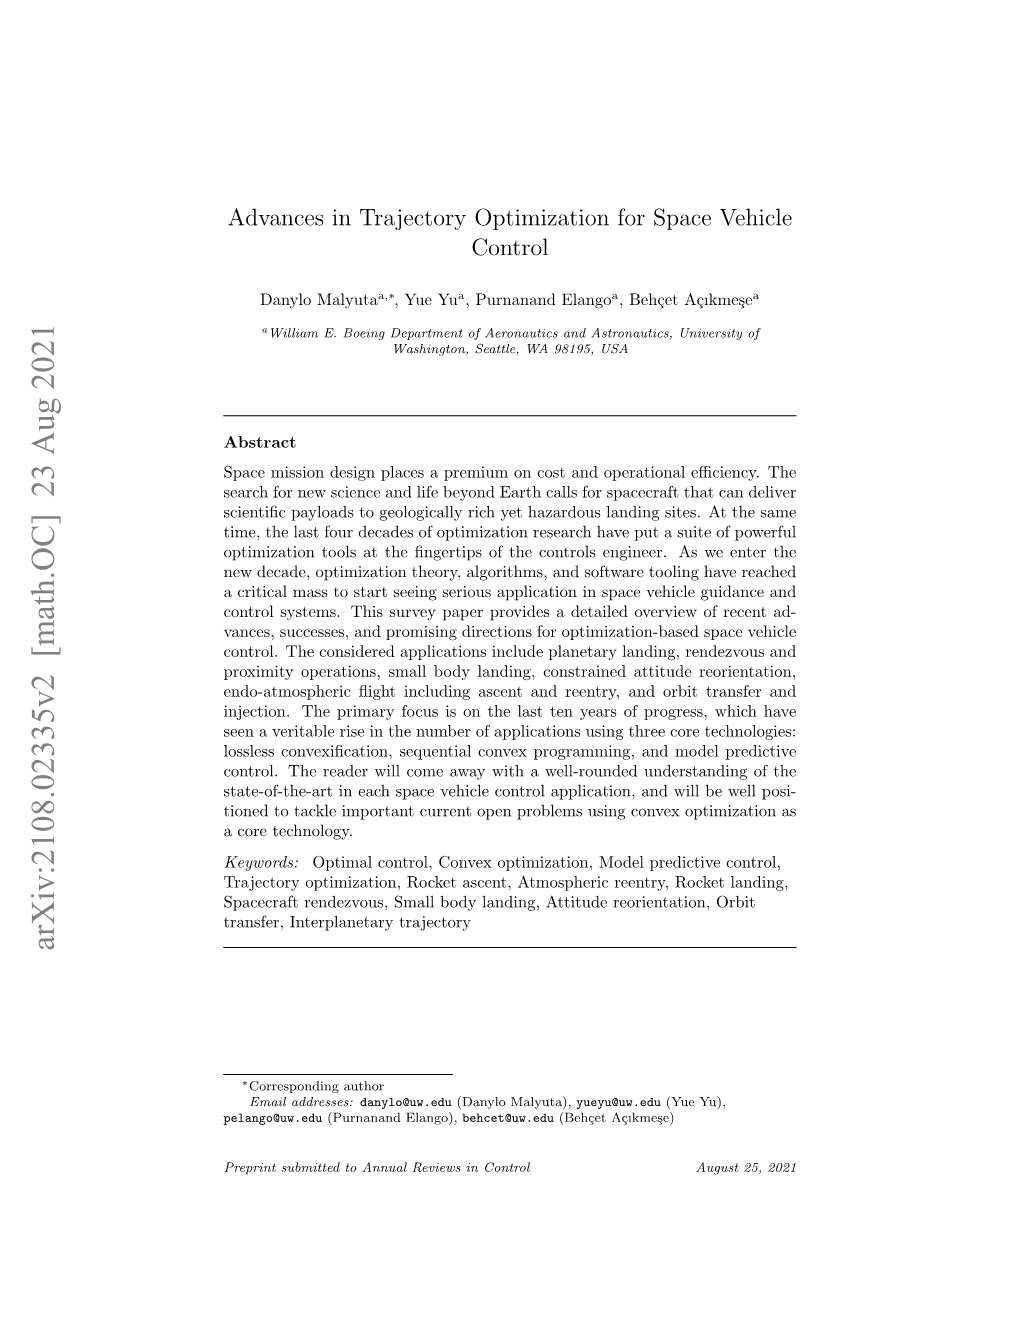 Advances in Trajectory Optimization for Space Vehicle Control